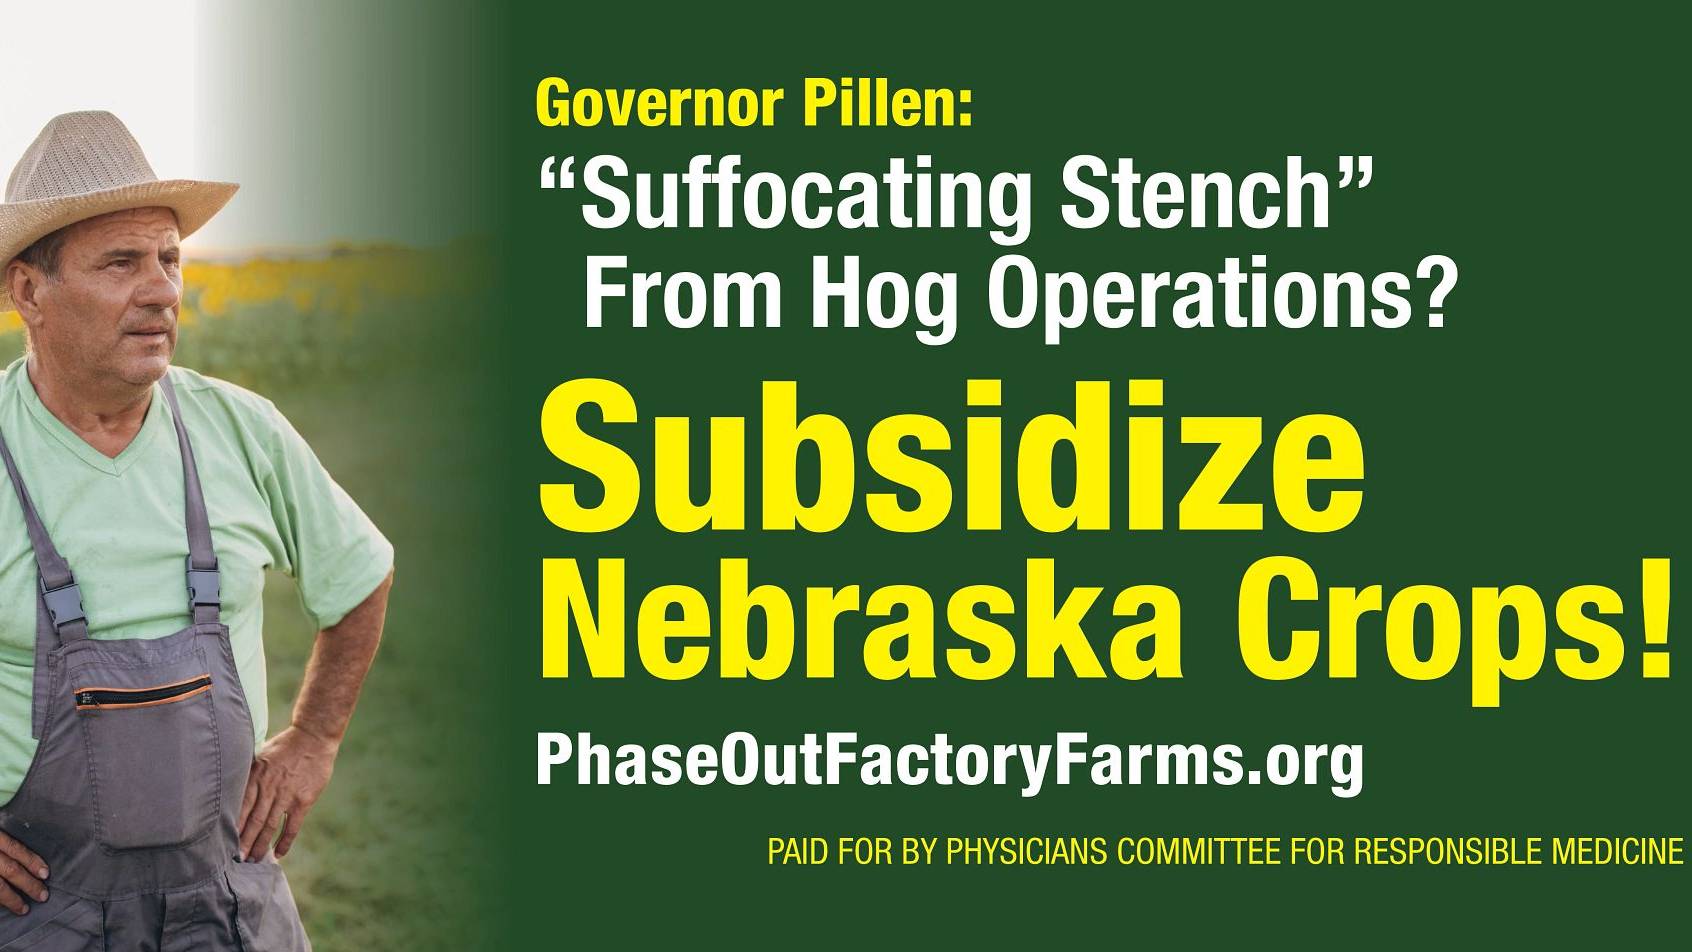 Doctors Post Billboards Urging Nebraska Governor to Phase Out Factory Farms and Subsidize Water-Wise Crops